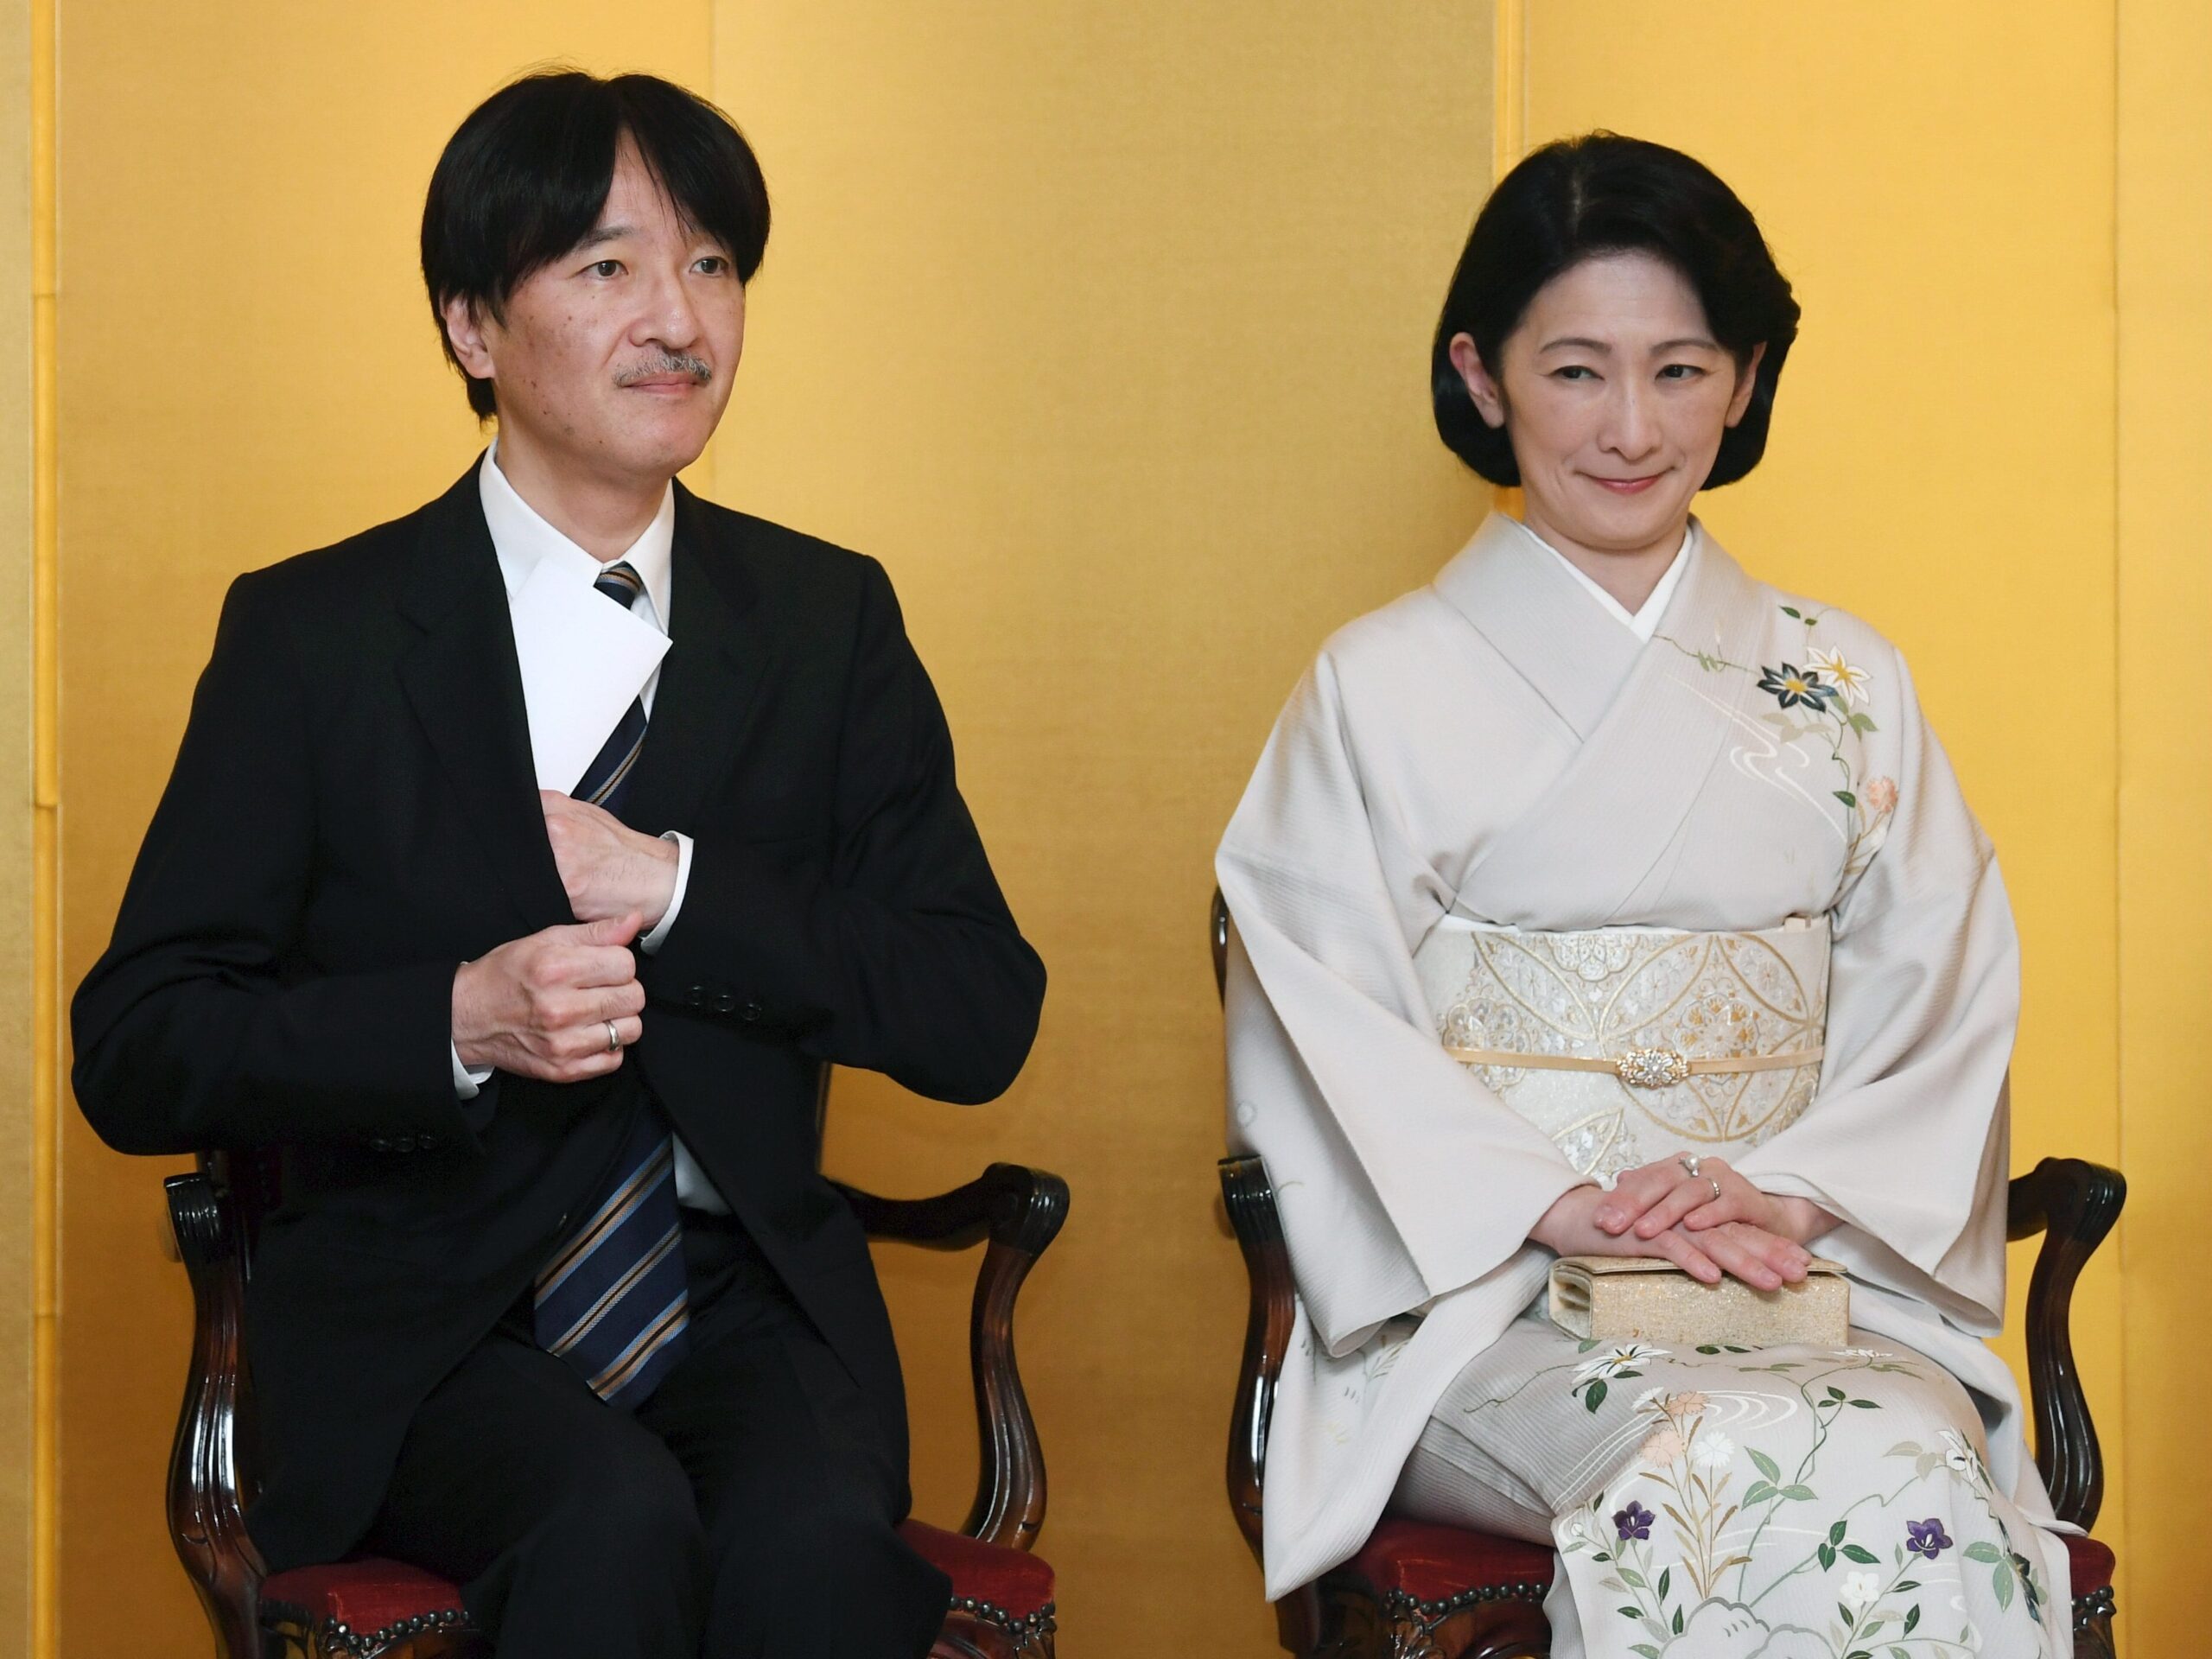 Crown Prince Akishino and Crown Princess Kiko of Japan attend Finnish-Japanese diplomatic relations Centennial Anniversary Reception at the Embassy of Japan in Helsinki, Finland on July 3, 2019.